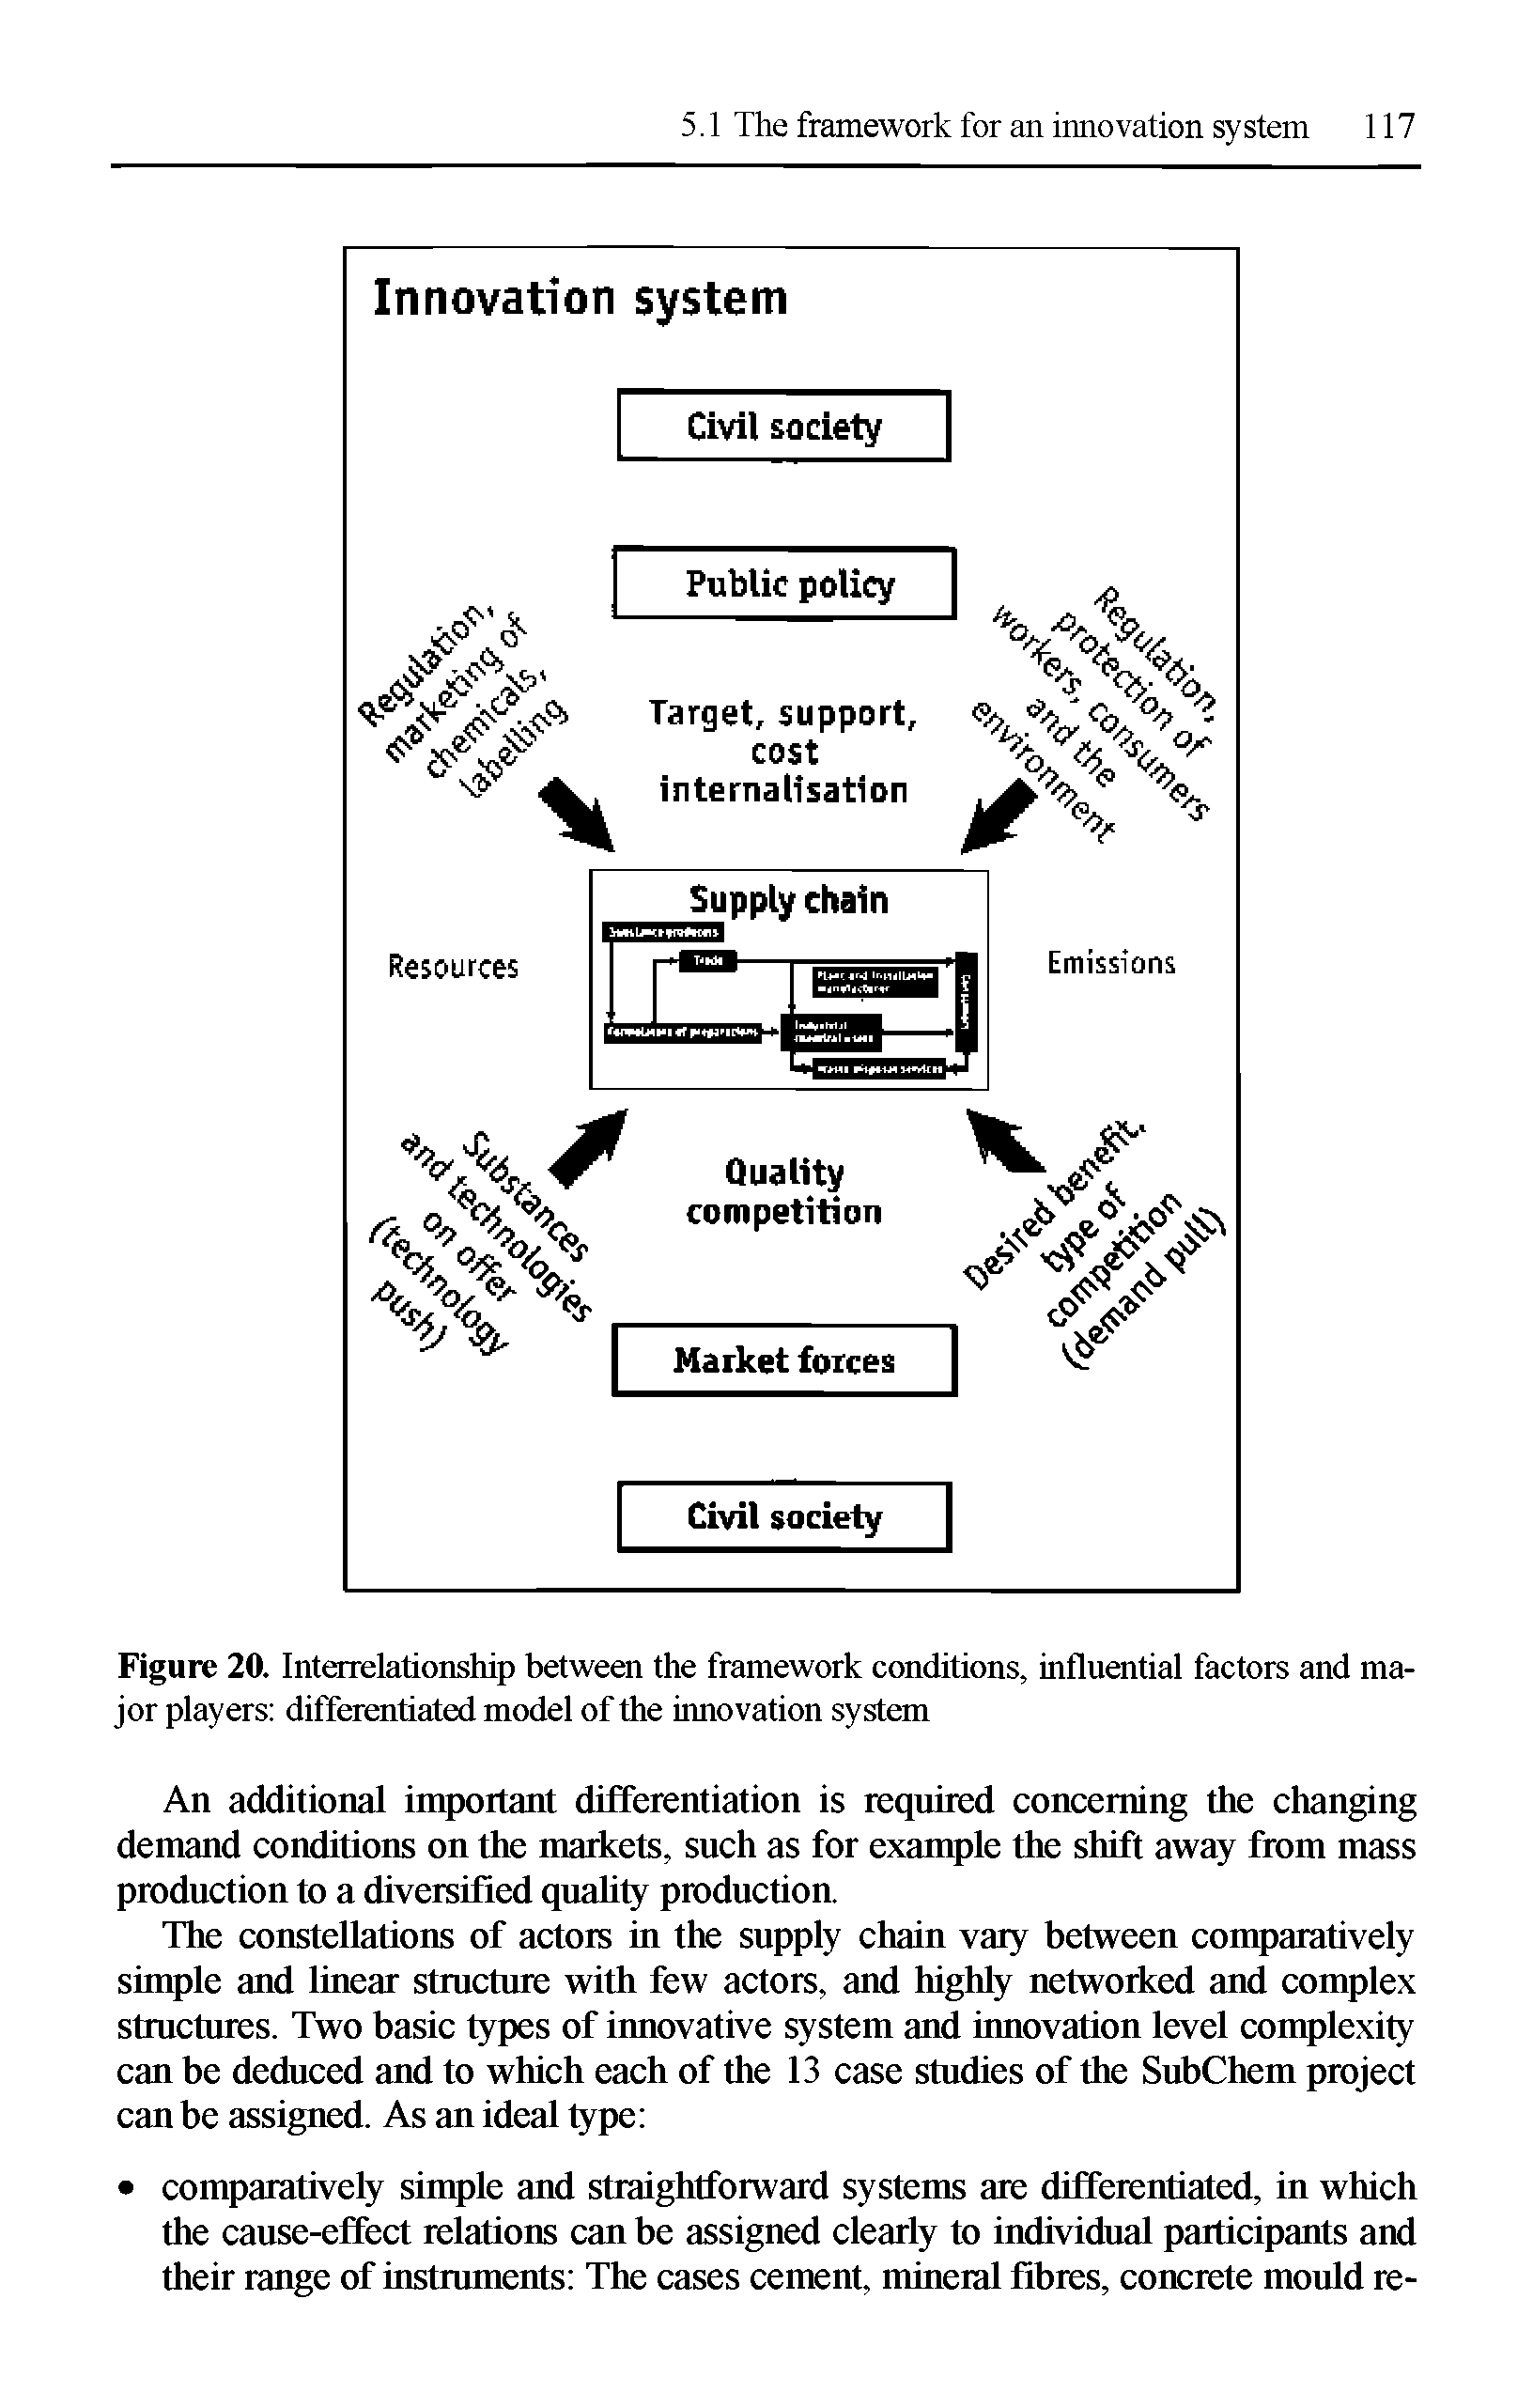 Figure 20. Interrelationship between the framework conditions, influential factors and major players differentiated model of the innovation system...